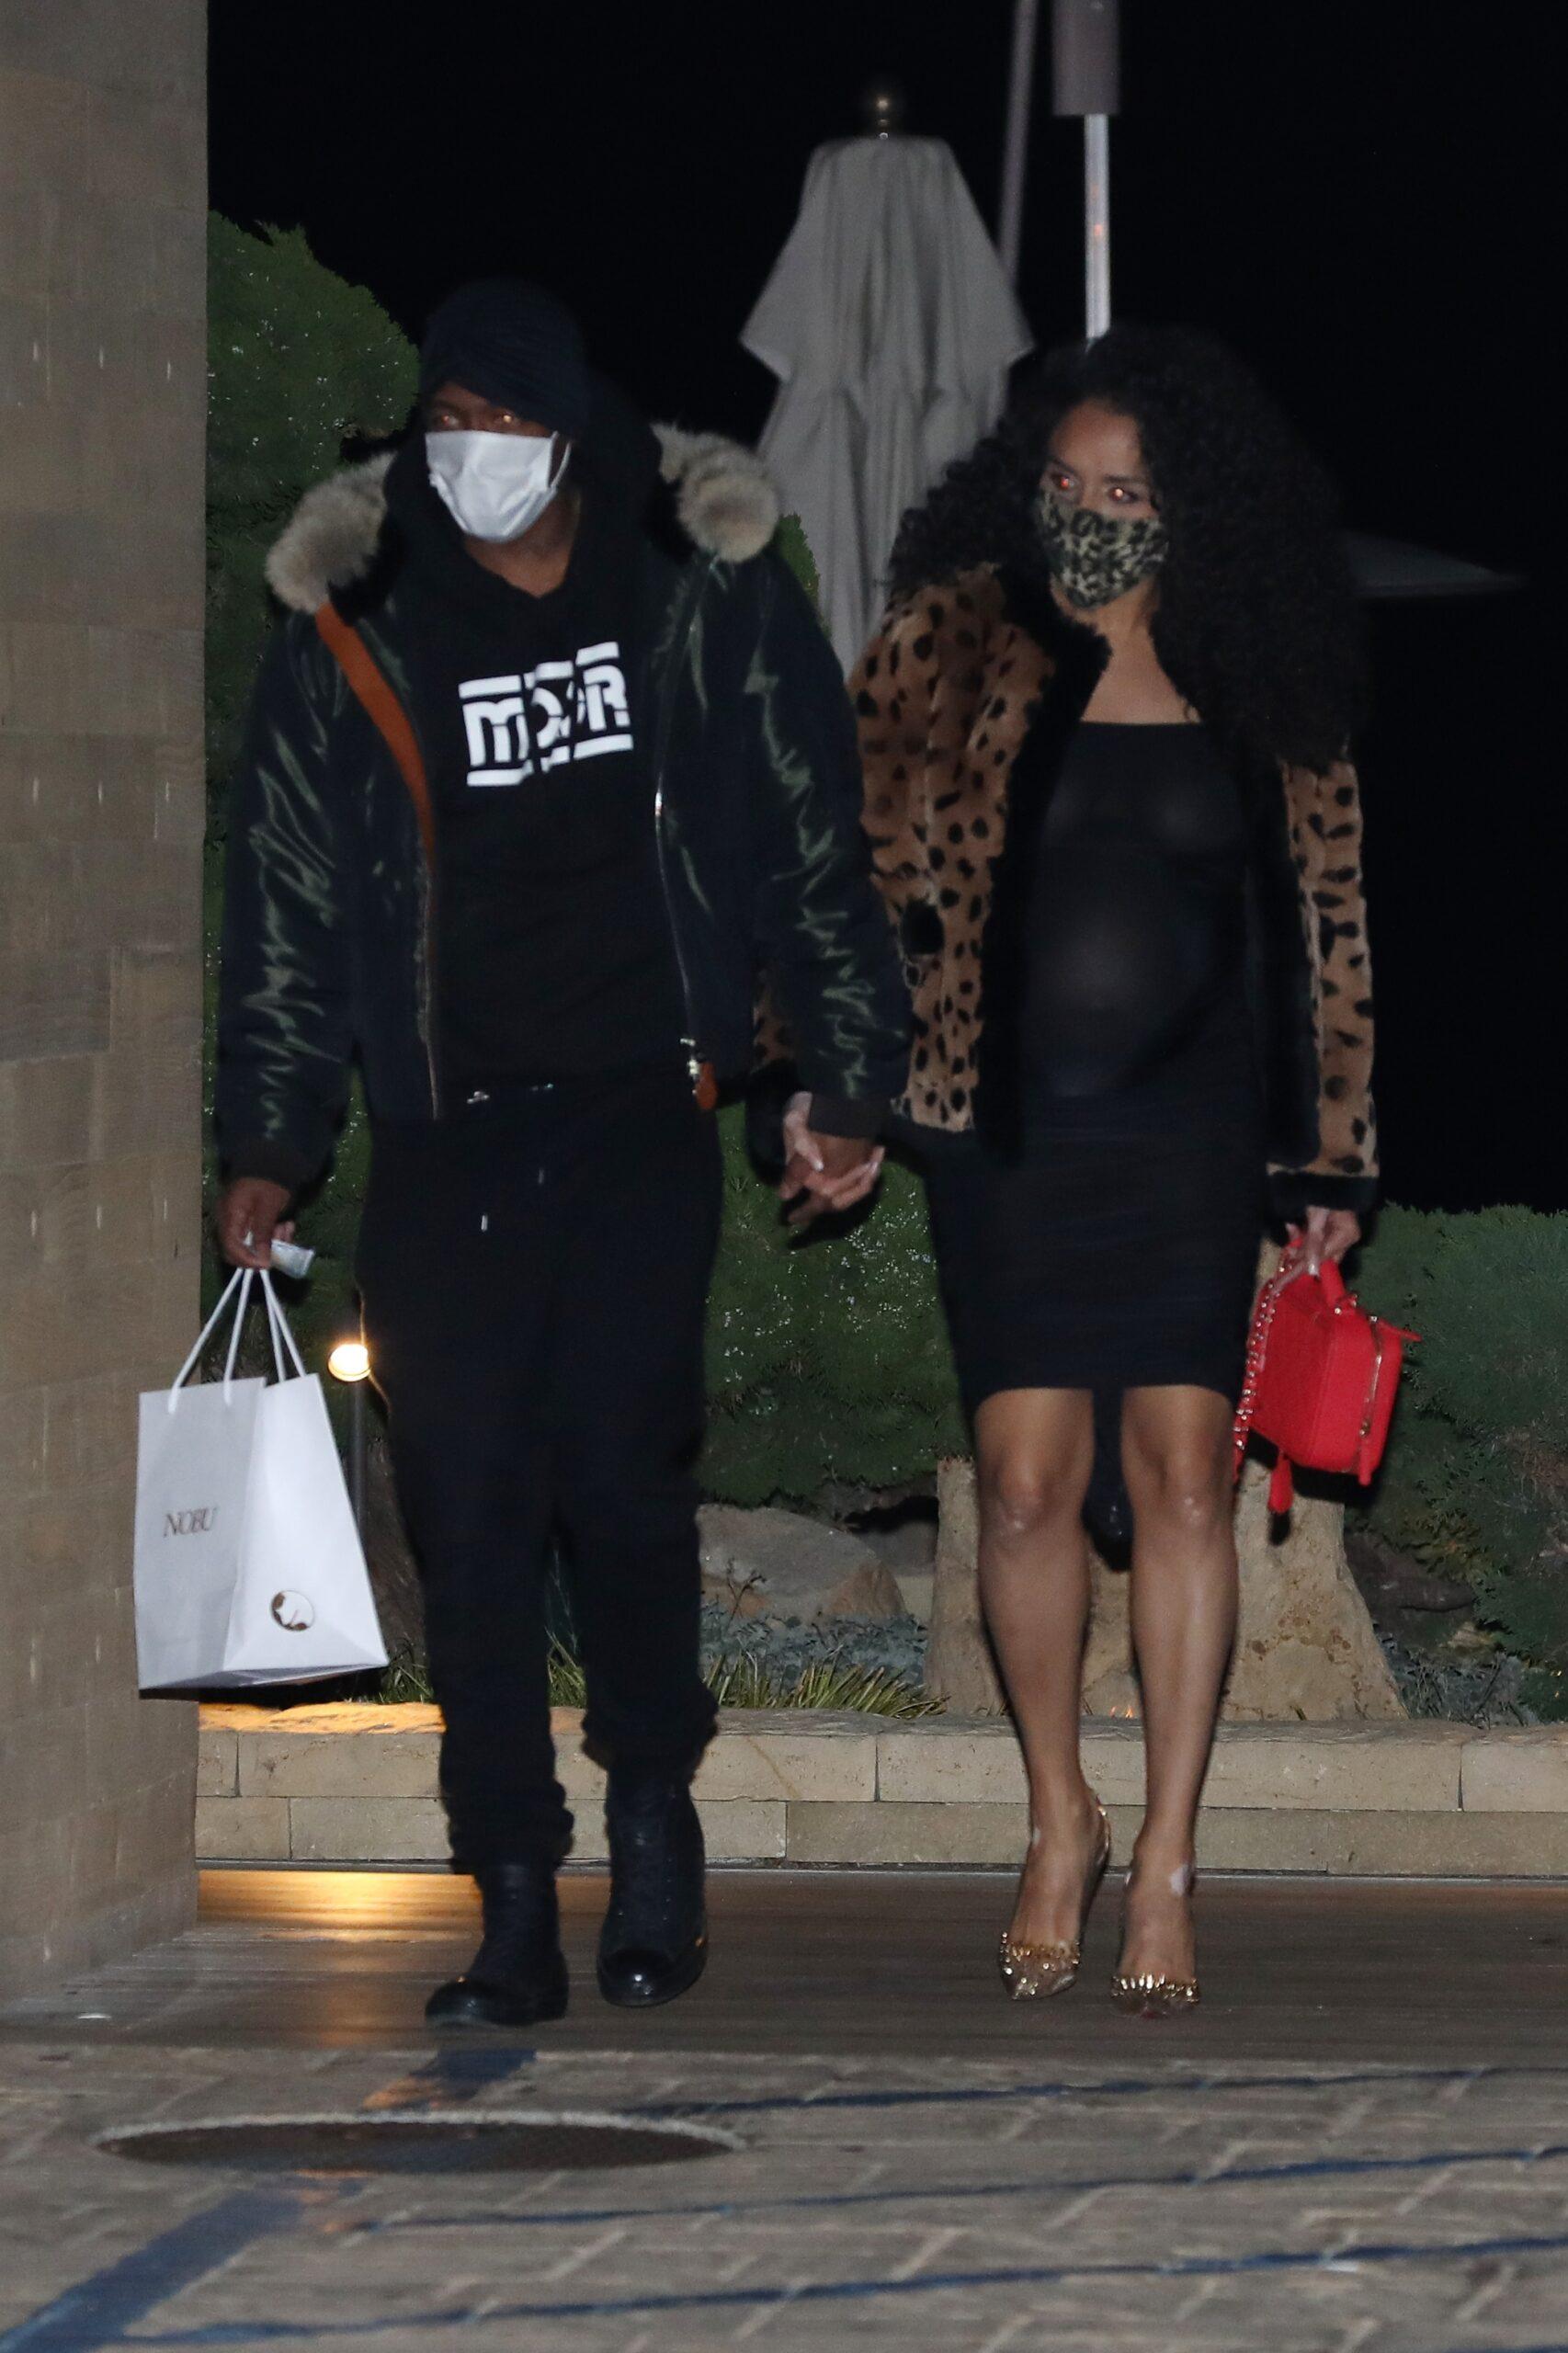 Nick Cannon and pregnant Brittany Bell grab dinner at Nobu Malibu